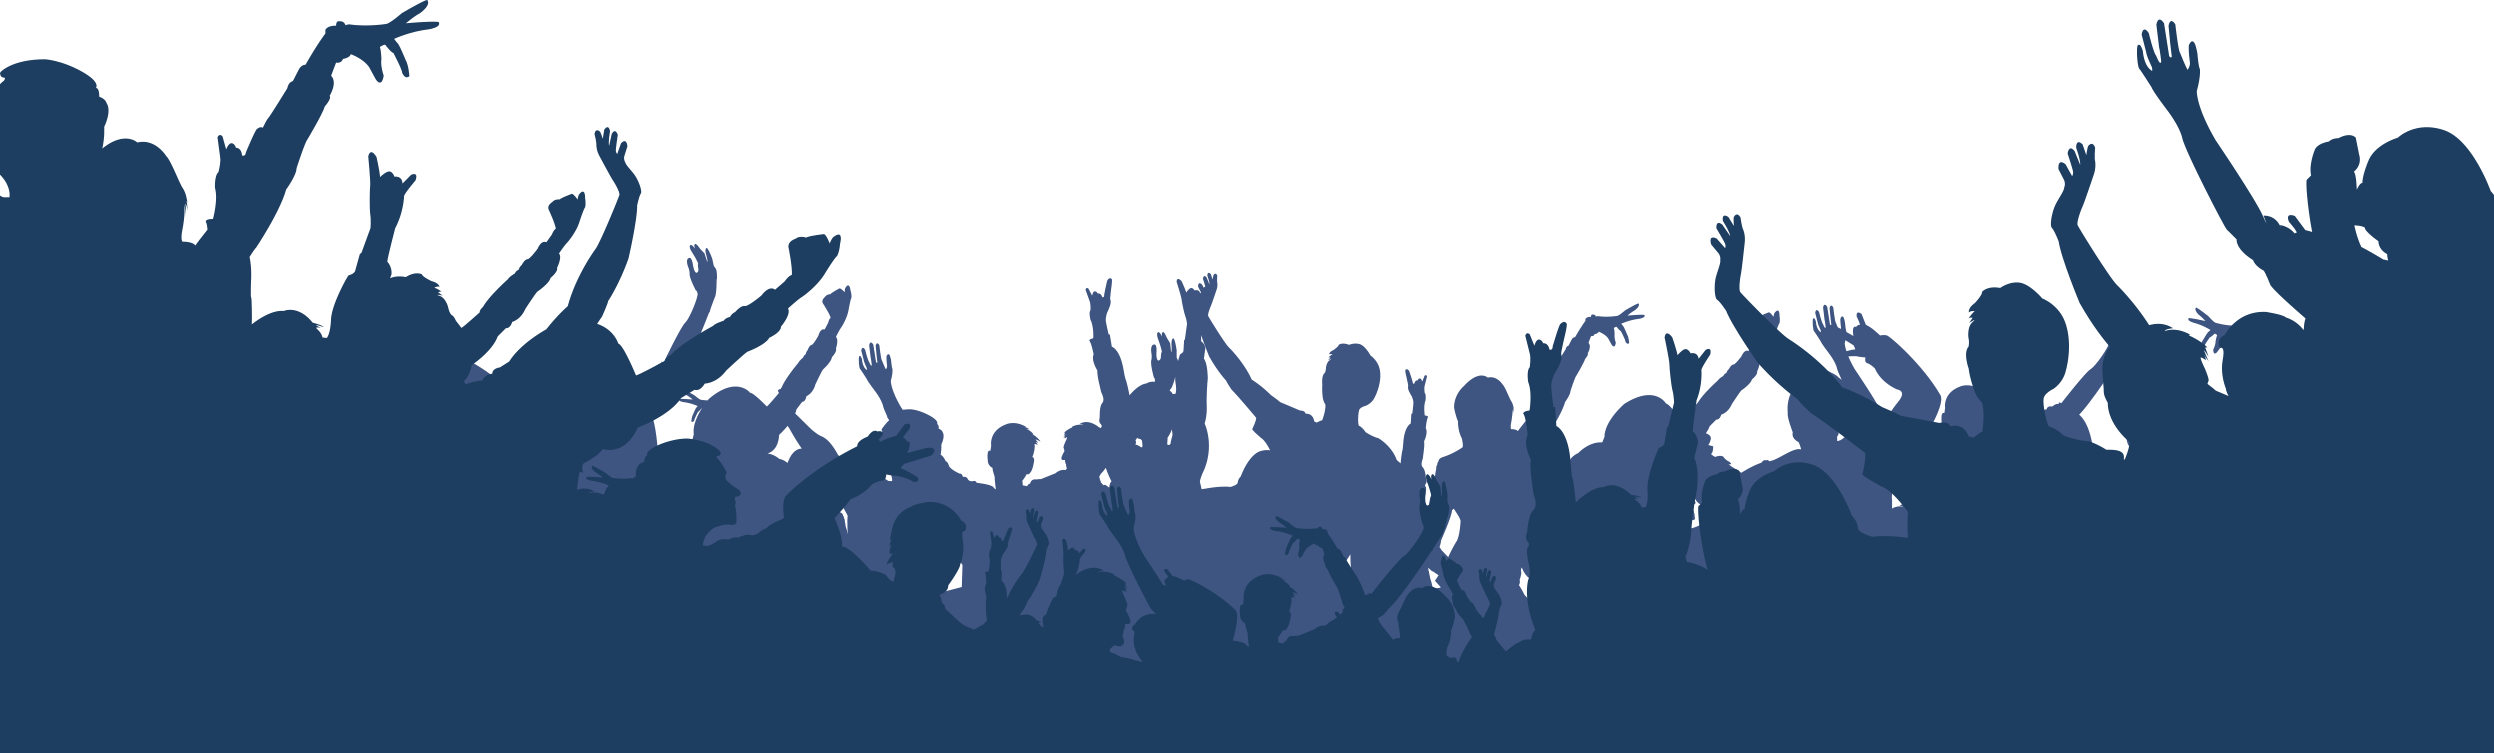 audience vector crowd clapping frames illustrations #27580